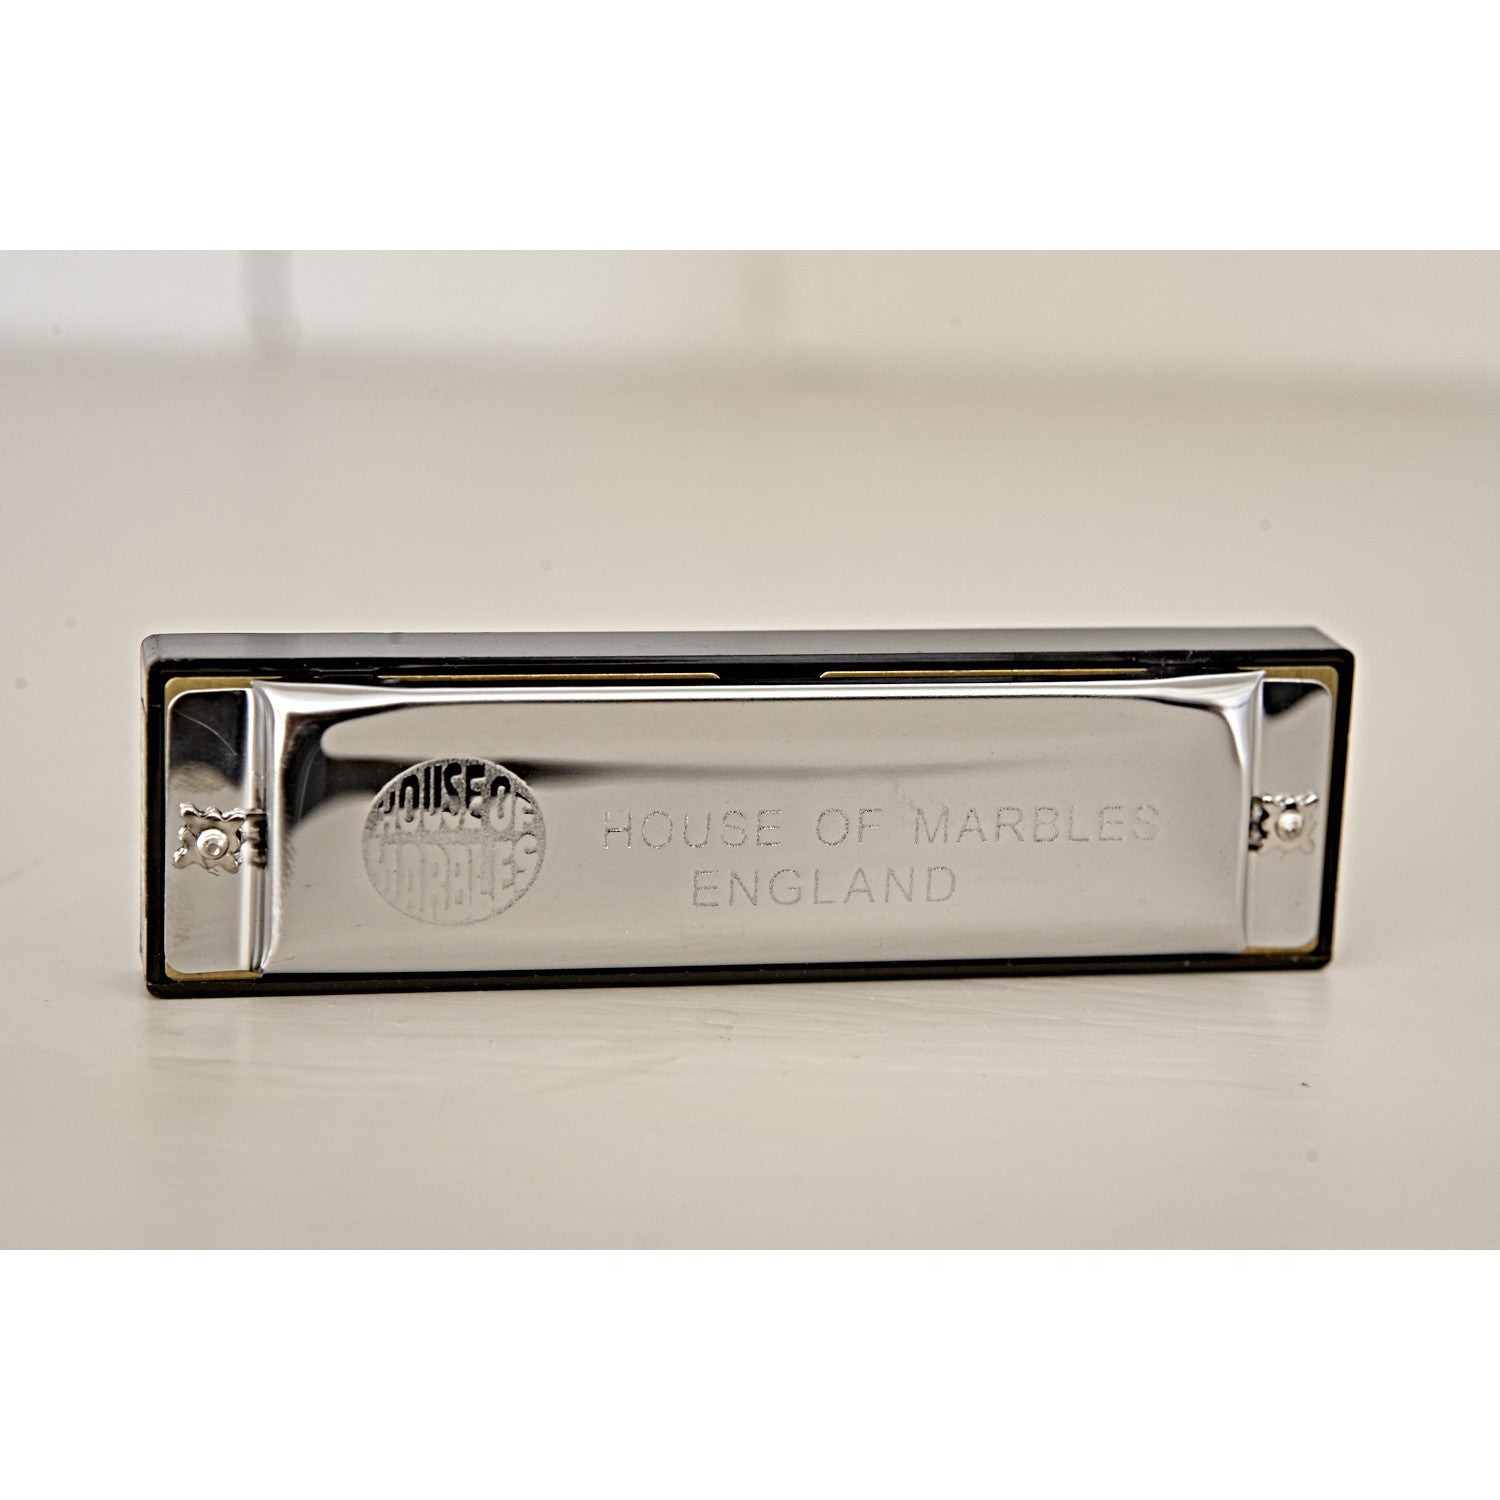 Harmonica, unboxed, standing up to show imprint